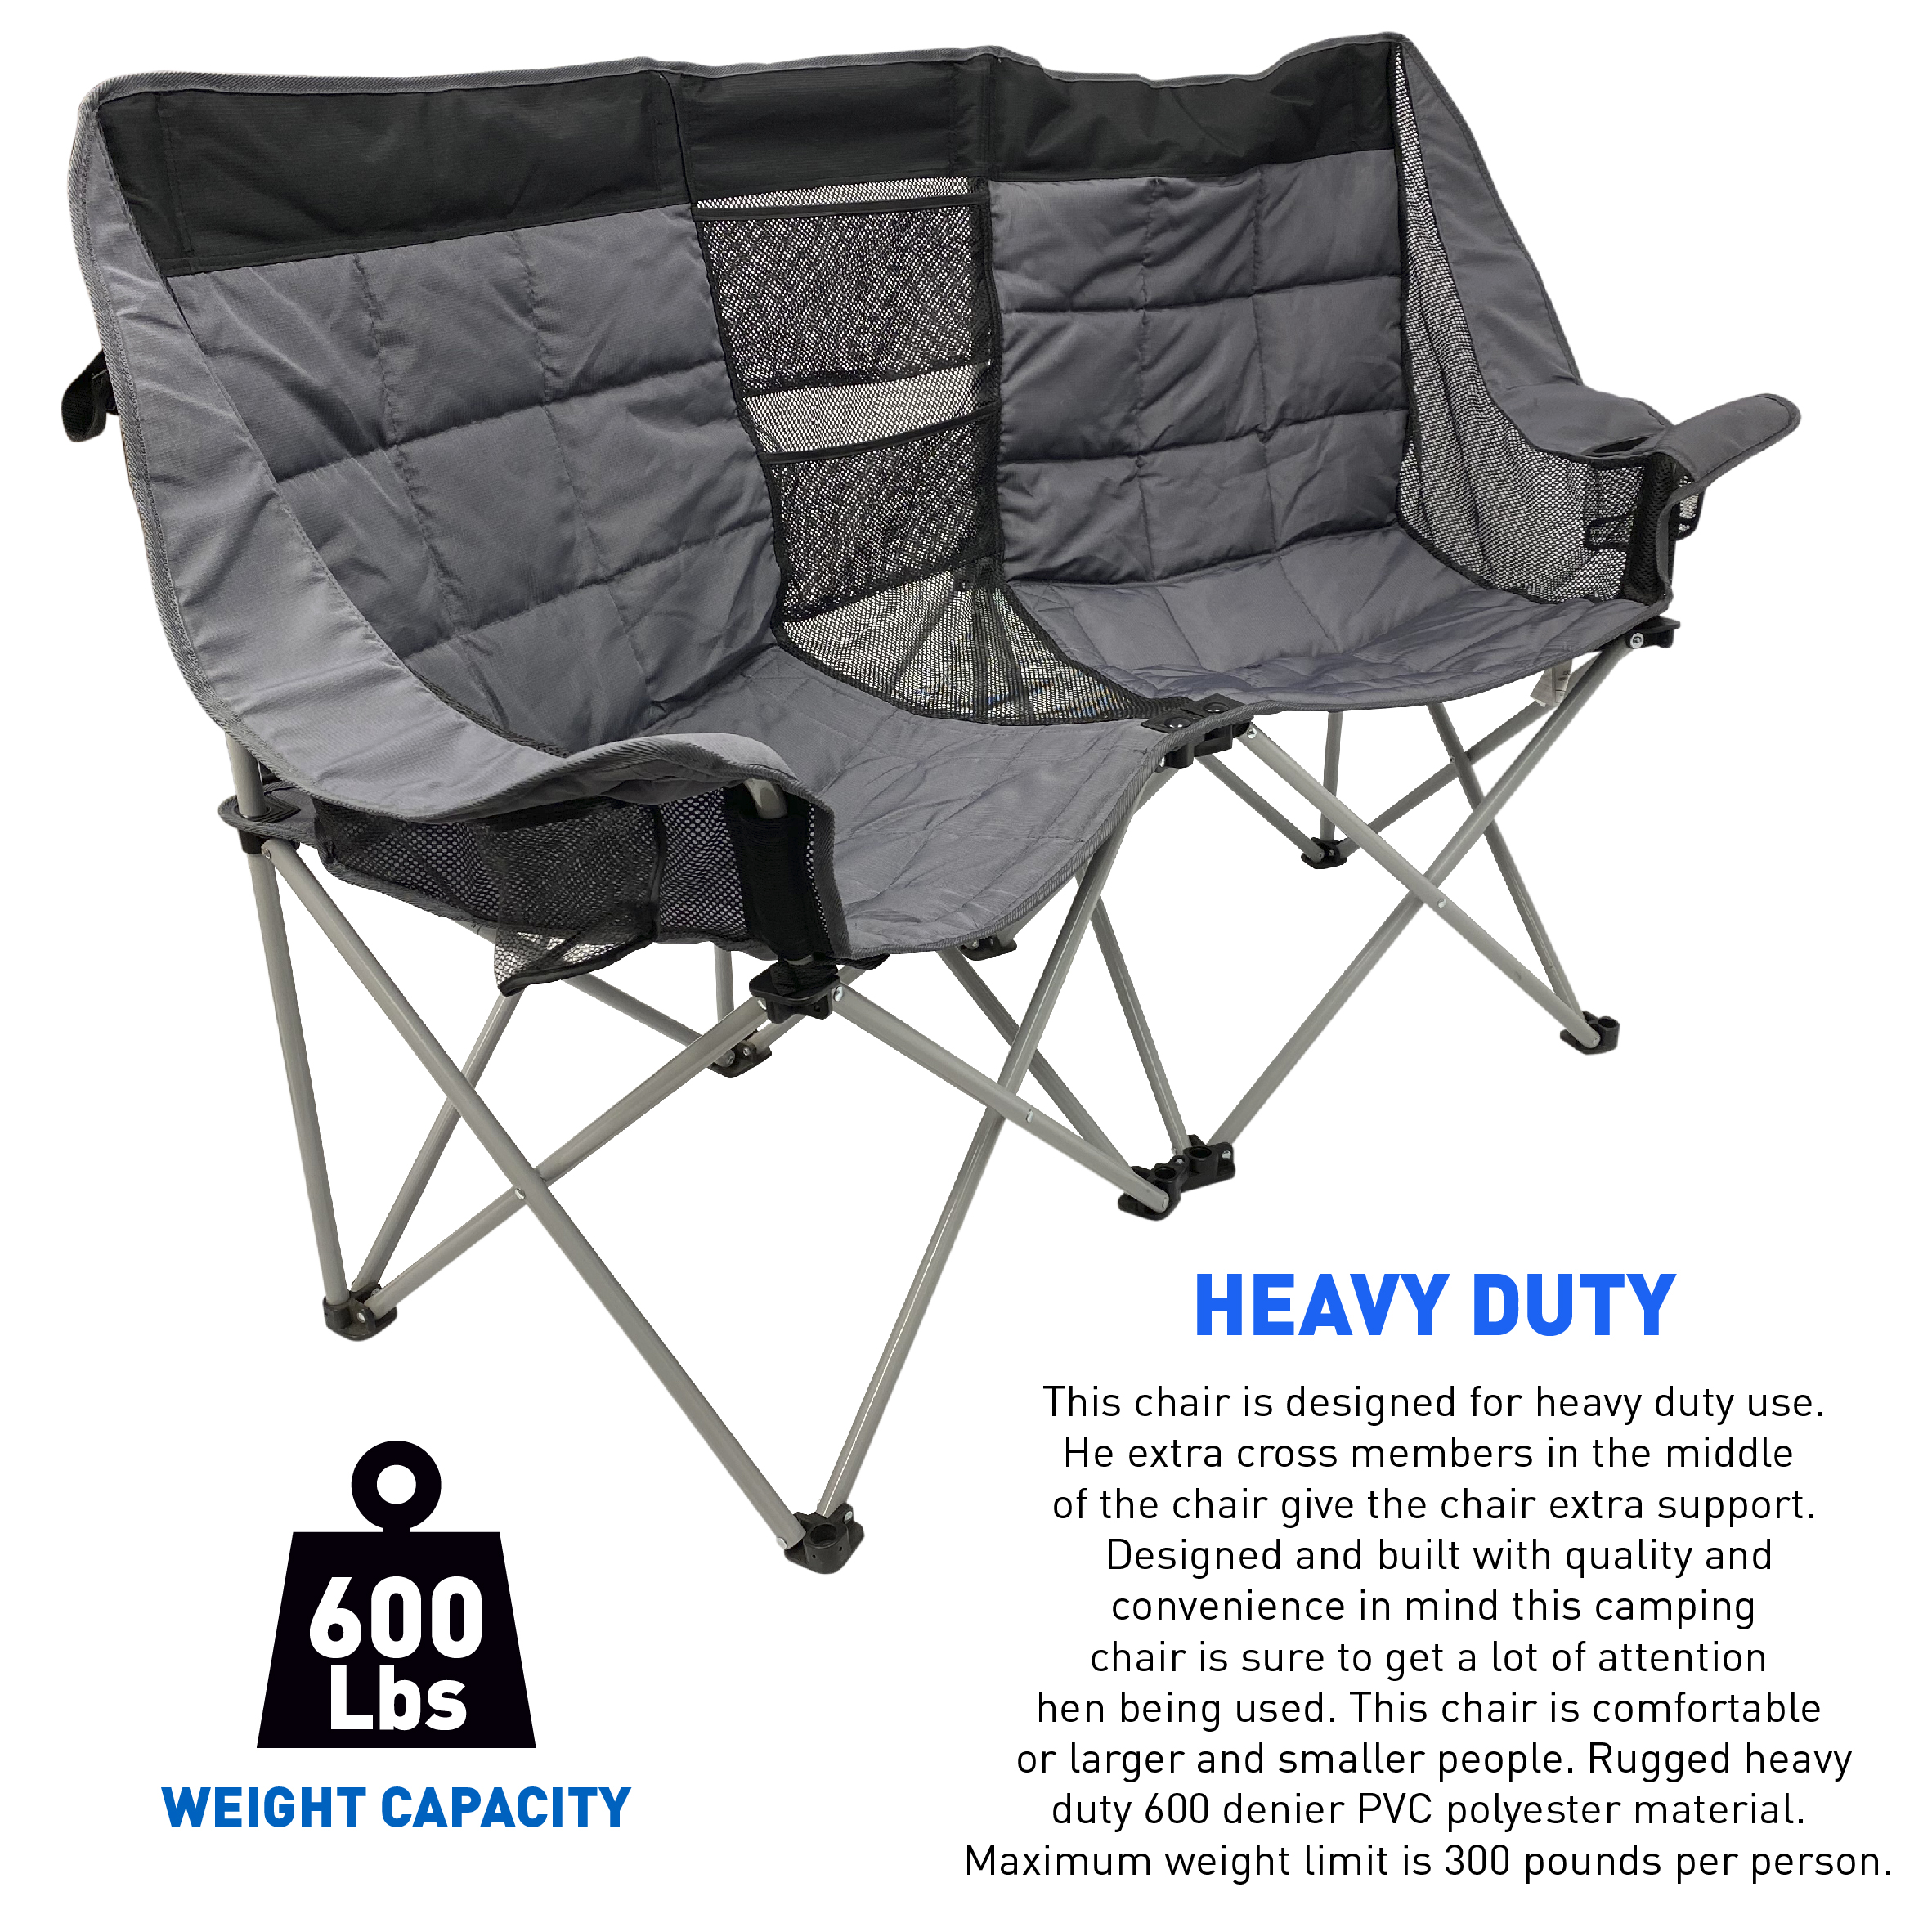 EasyGo Product Camping Chair - Double Love Seat - Heavy Duty Oversized Camping RV Chair Folds Easily and is Padded - Black Grey - image 2 of 5